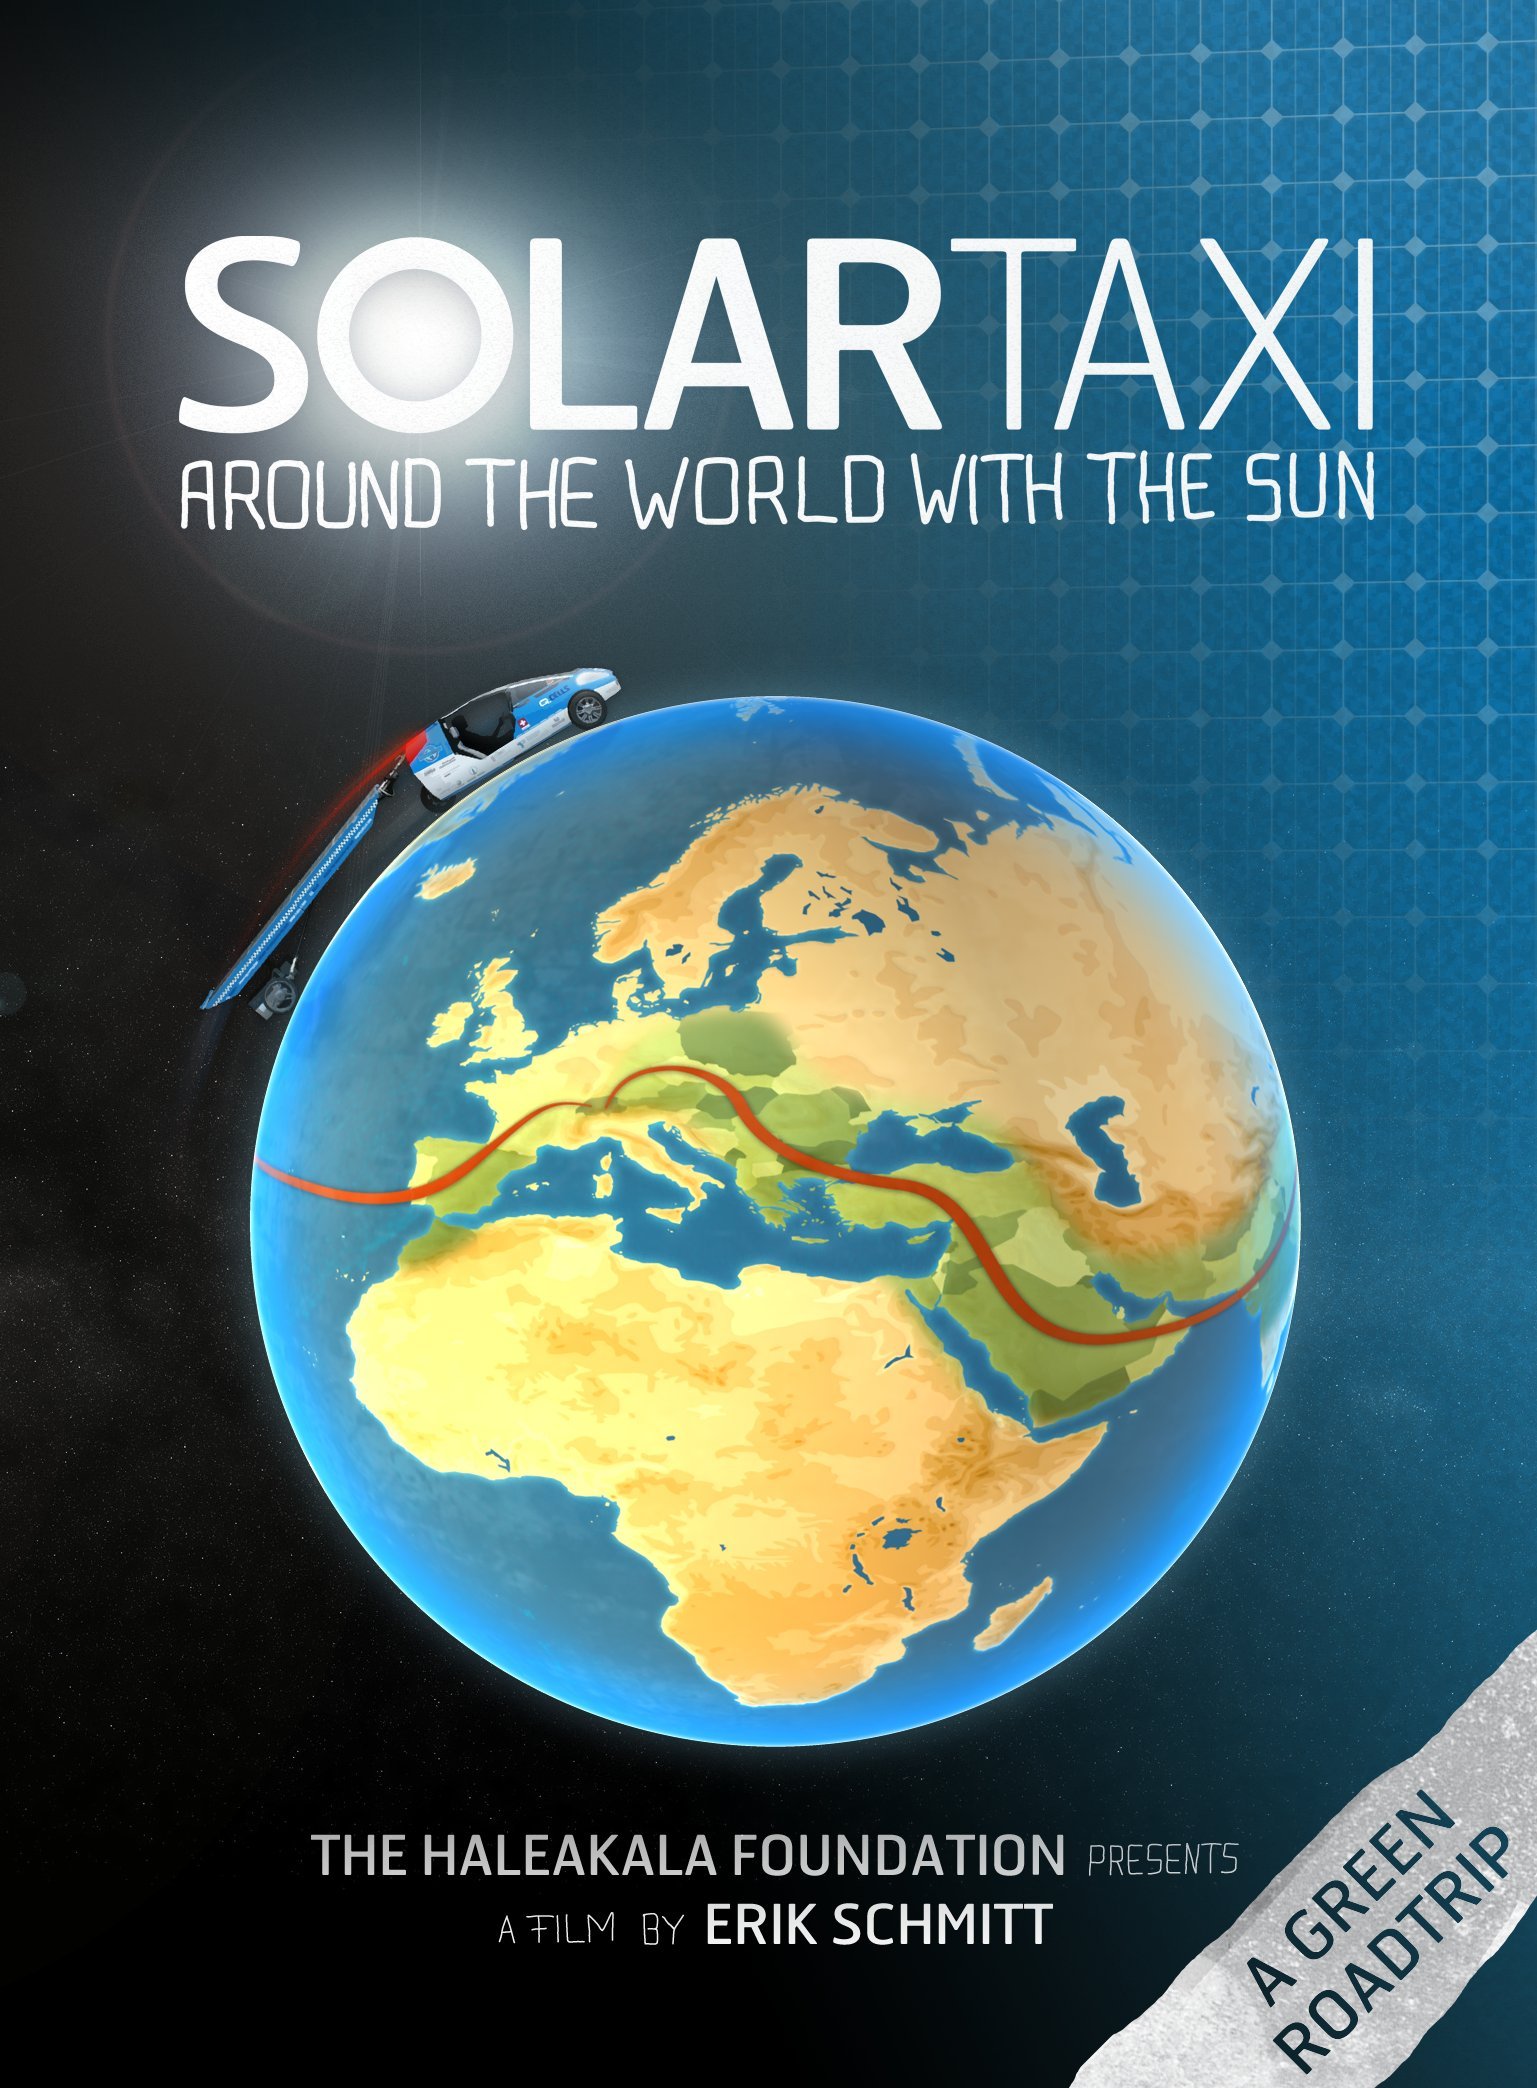 Solartaxi: Around the World with the Sun